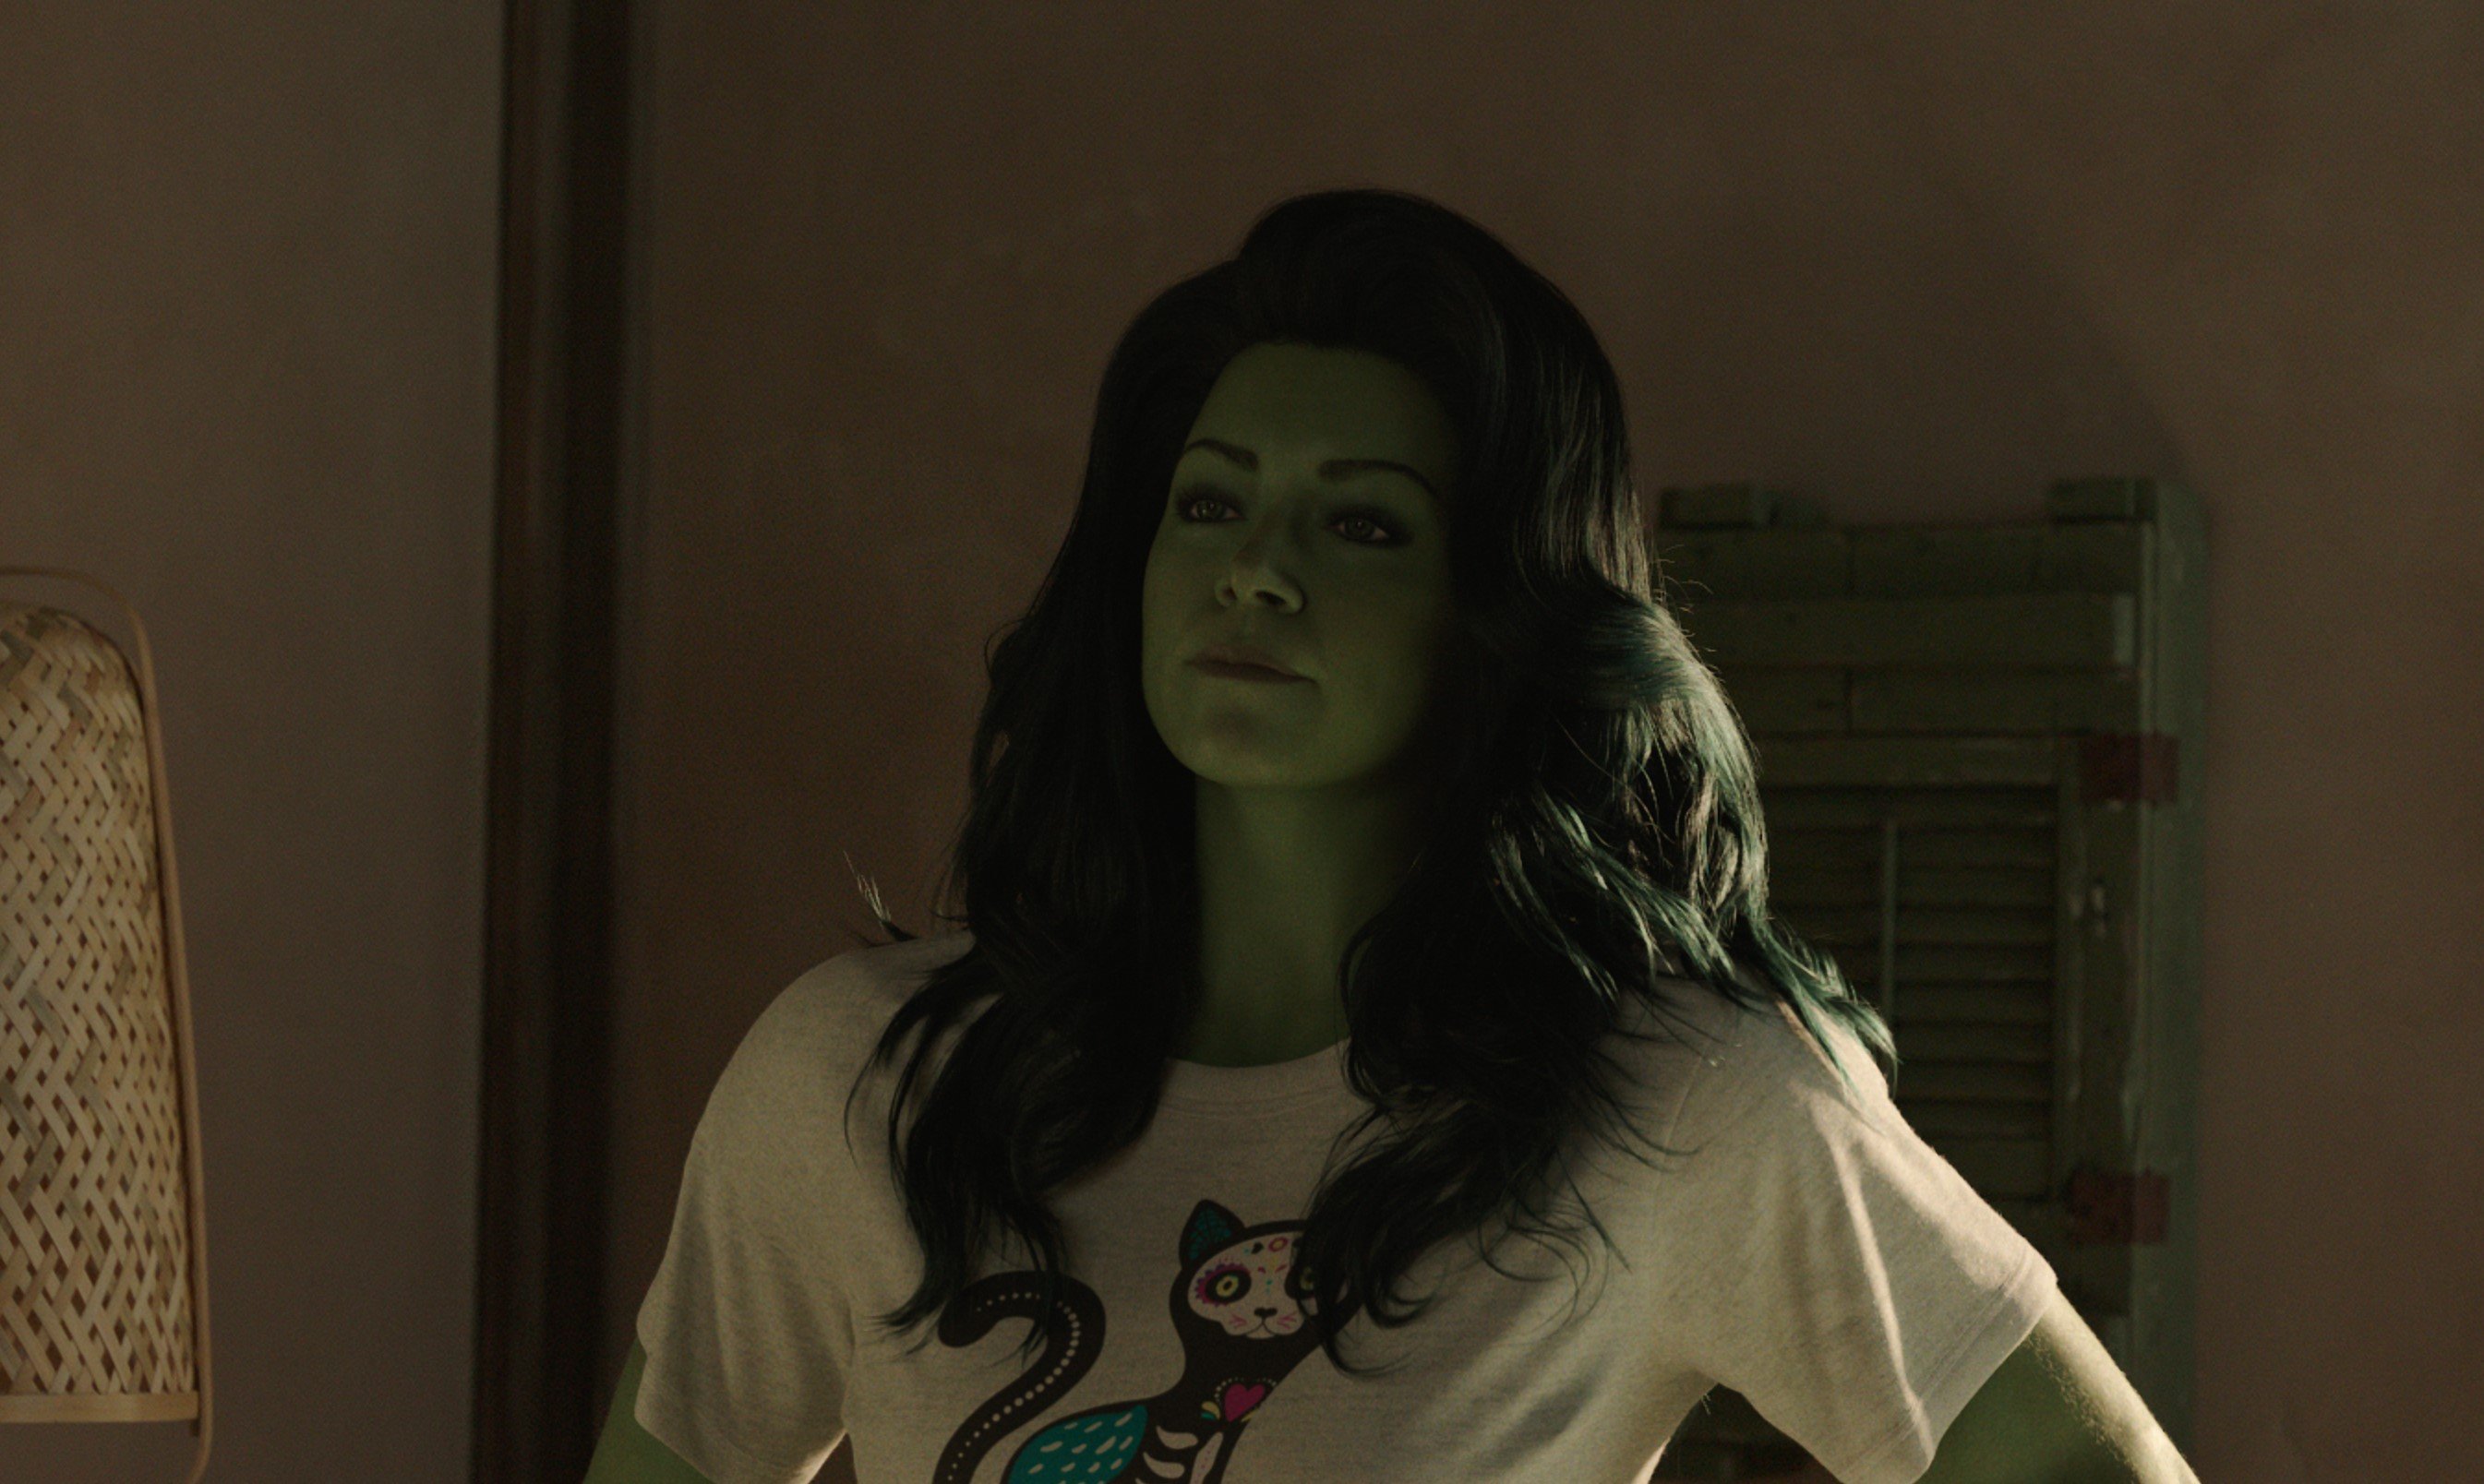 Tatiana Maslany in 'She-Hulk: Attorney at Law,' which has a release date of Aug. 18. She's green, her hair is down, and she's wearing a white T-shirt.